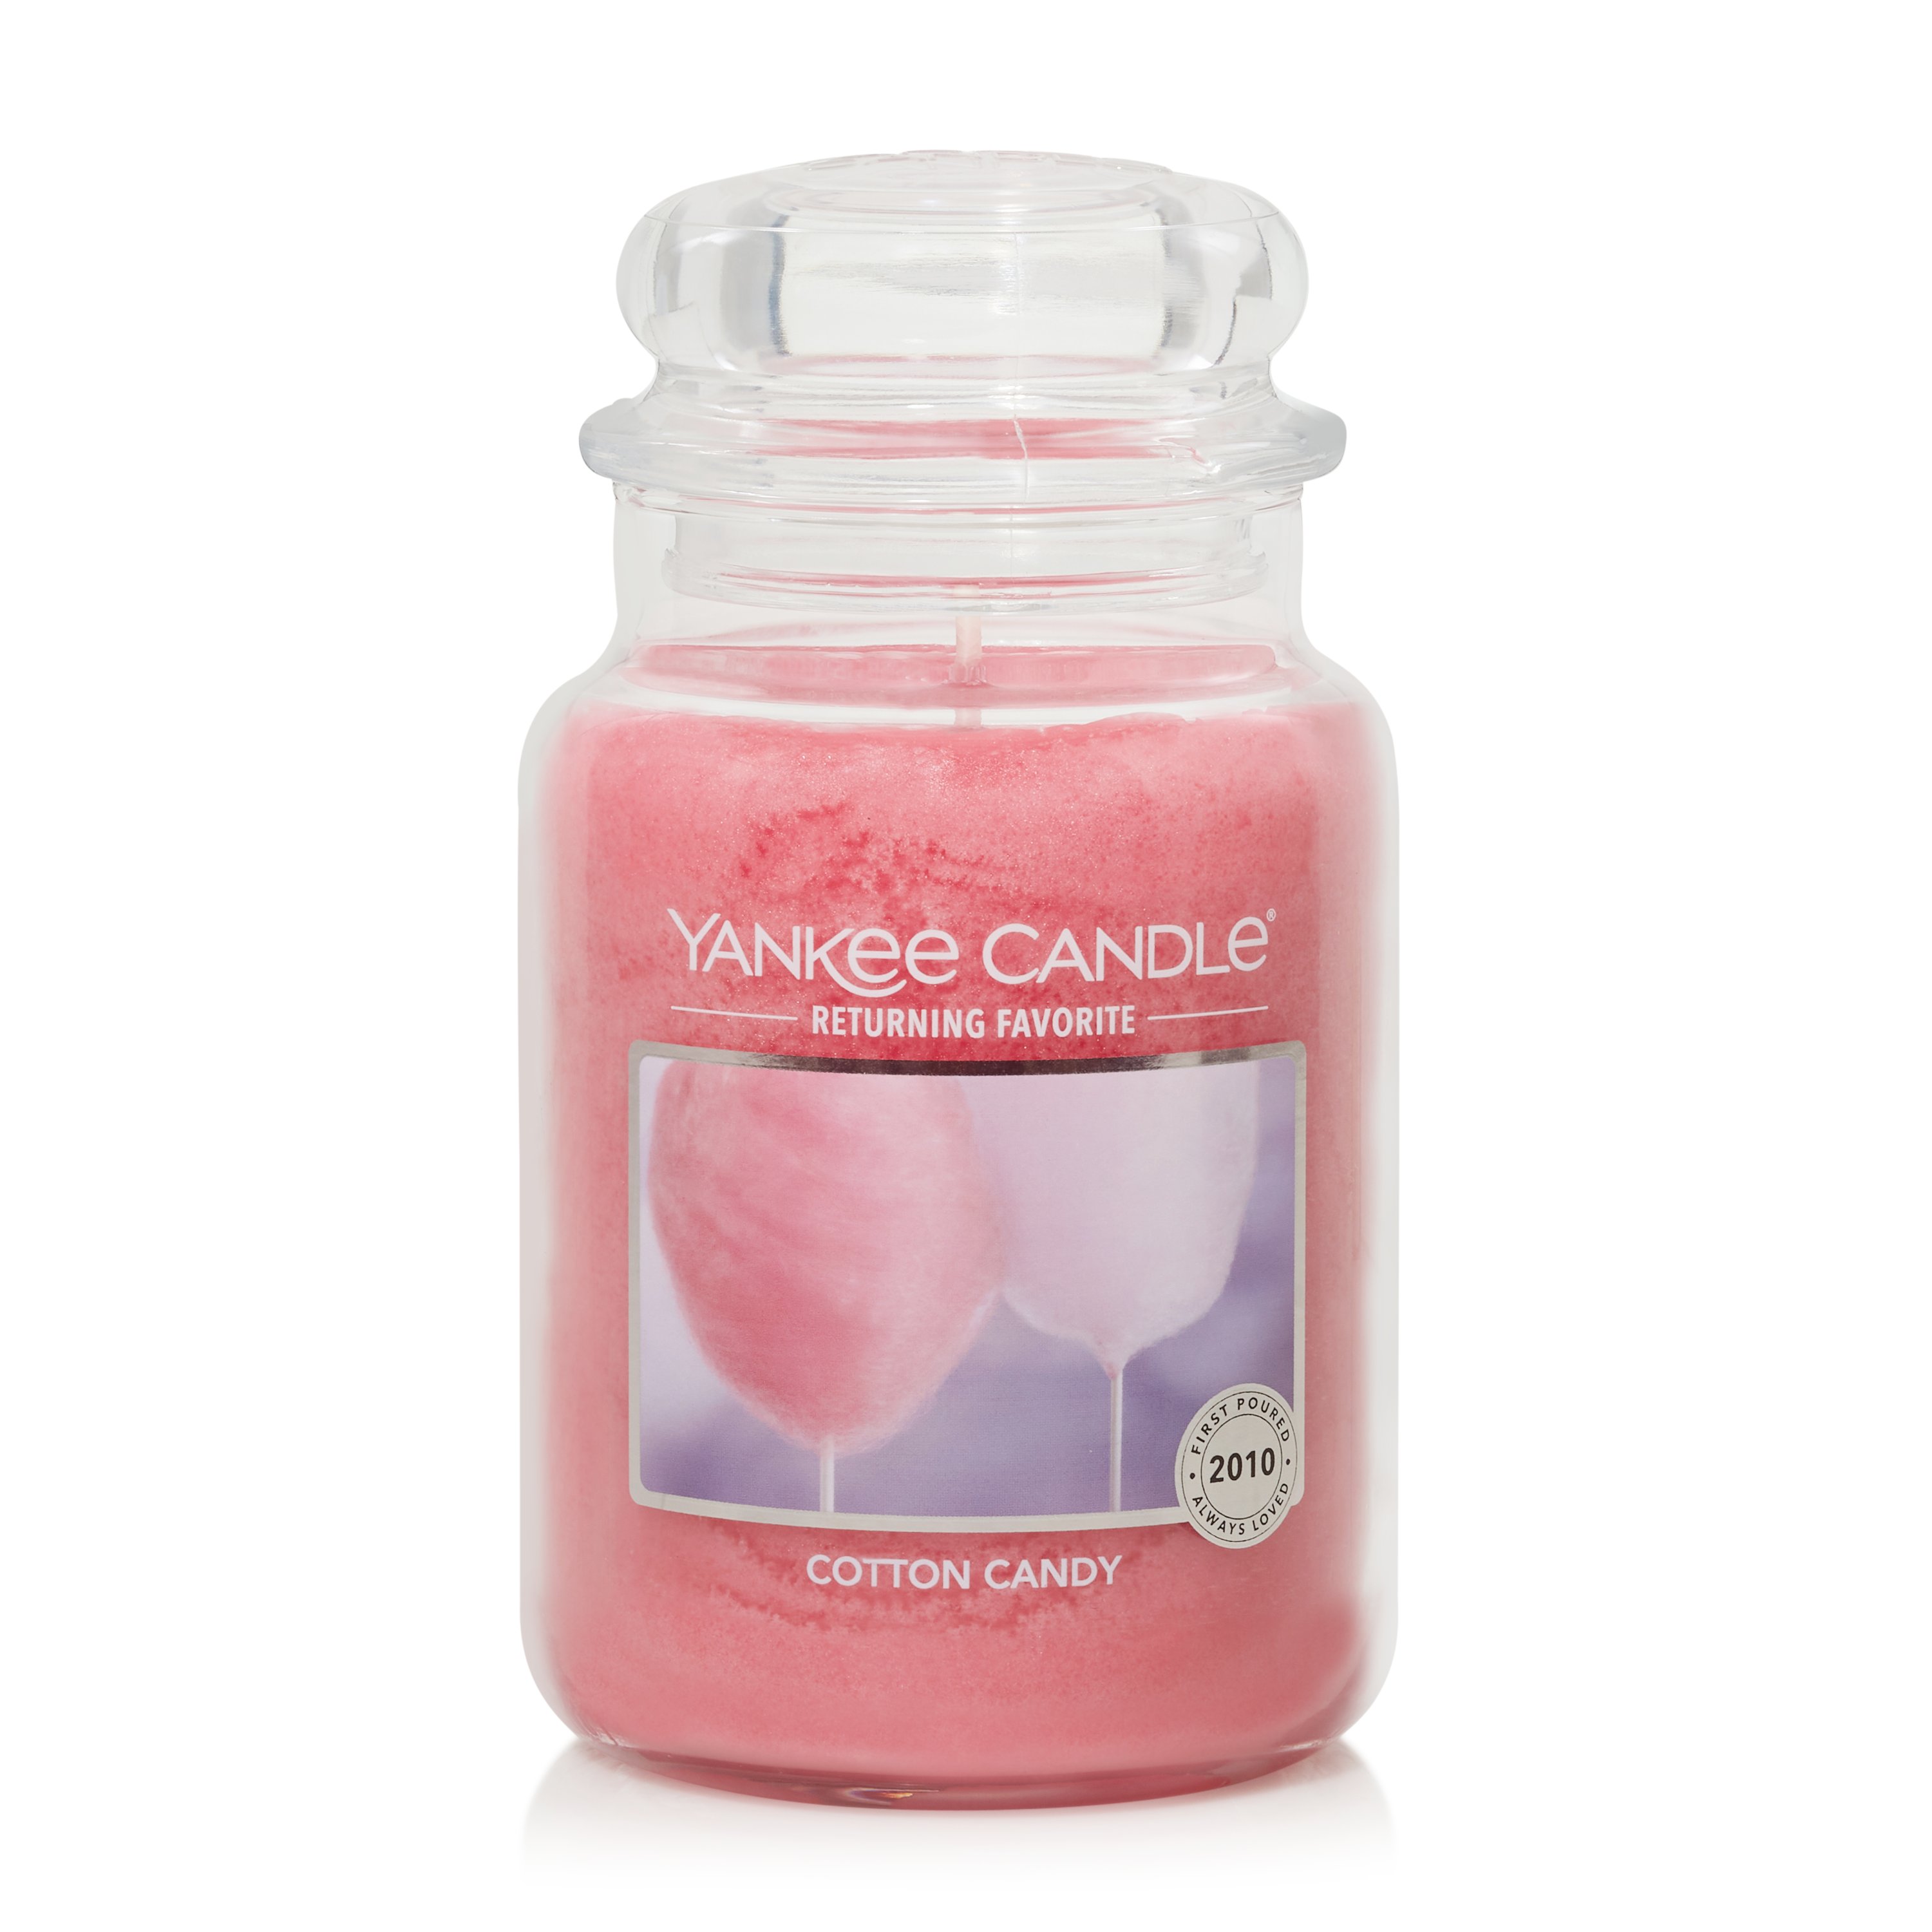 Yankee Candle Accents | Yankee Candle Cotton Candy Large Jar | Color: Pink | Size: 22 oz | Erica2685's Closet